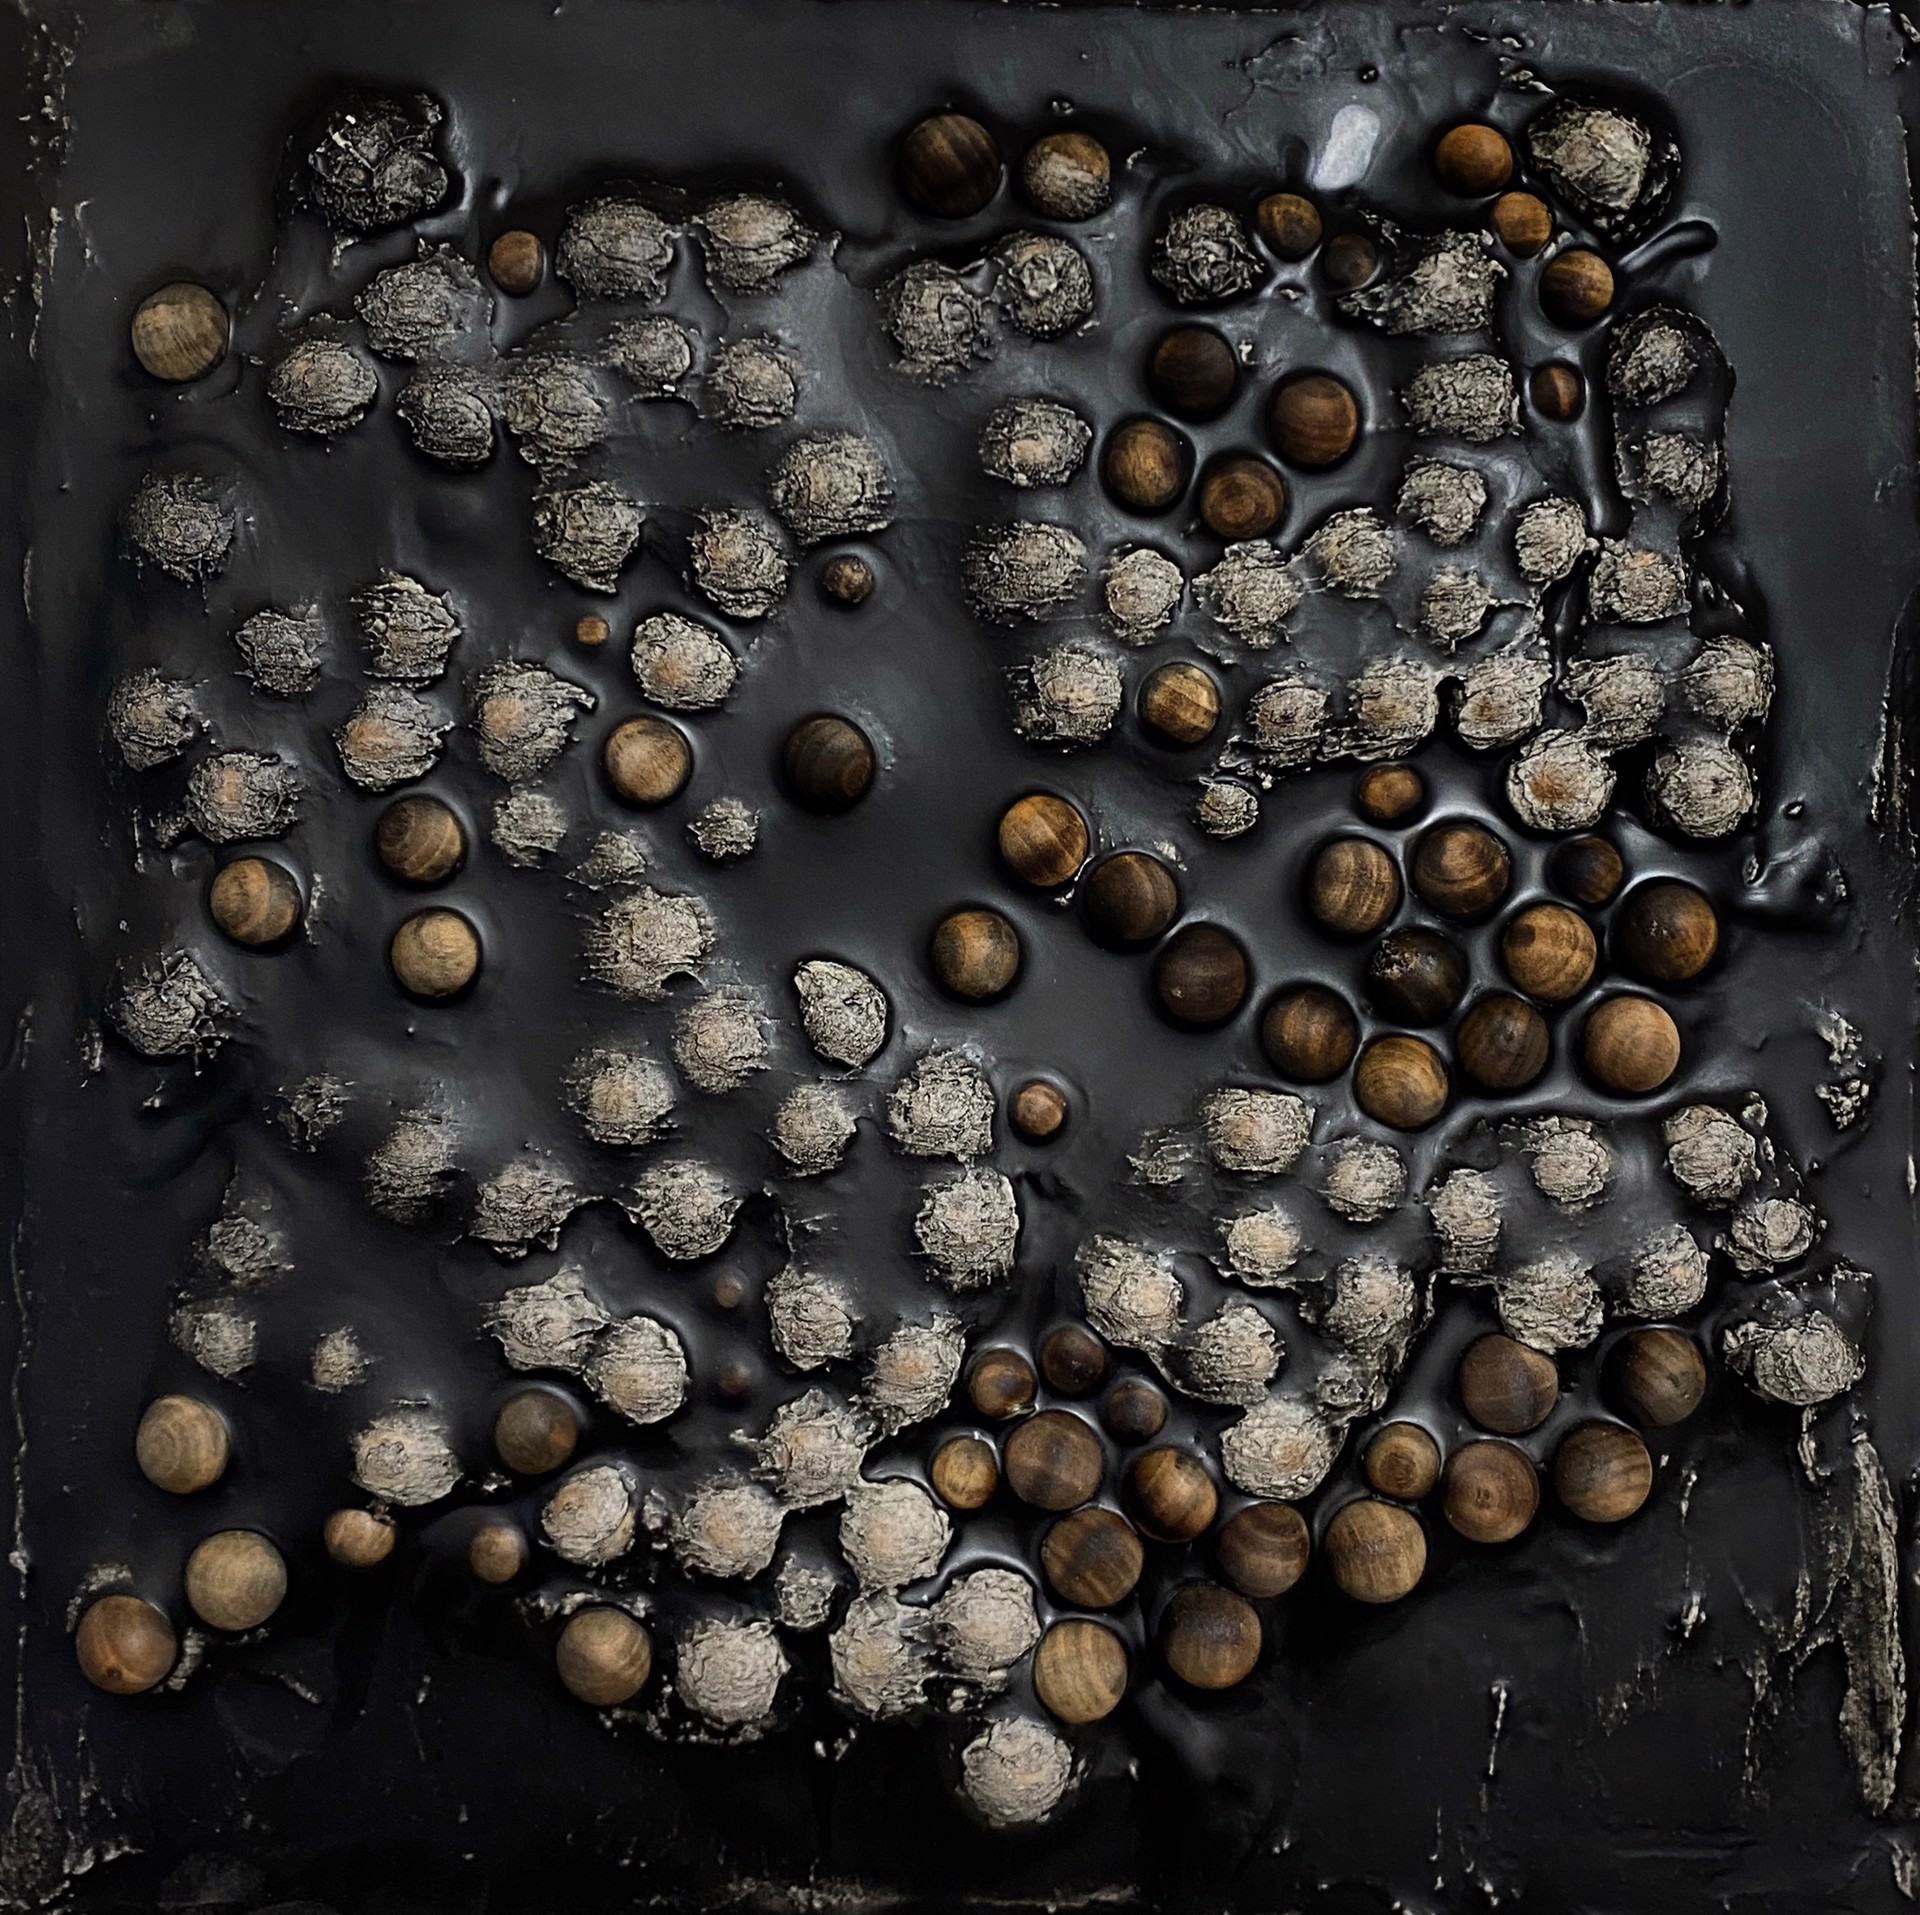 Burnt Salmon Eggs & Dark Chocolate Cookie Dough by Scott Connelly